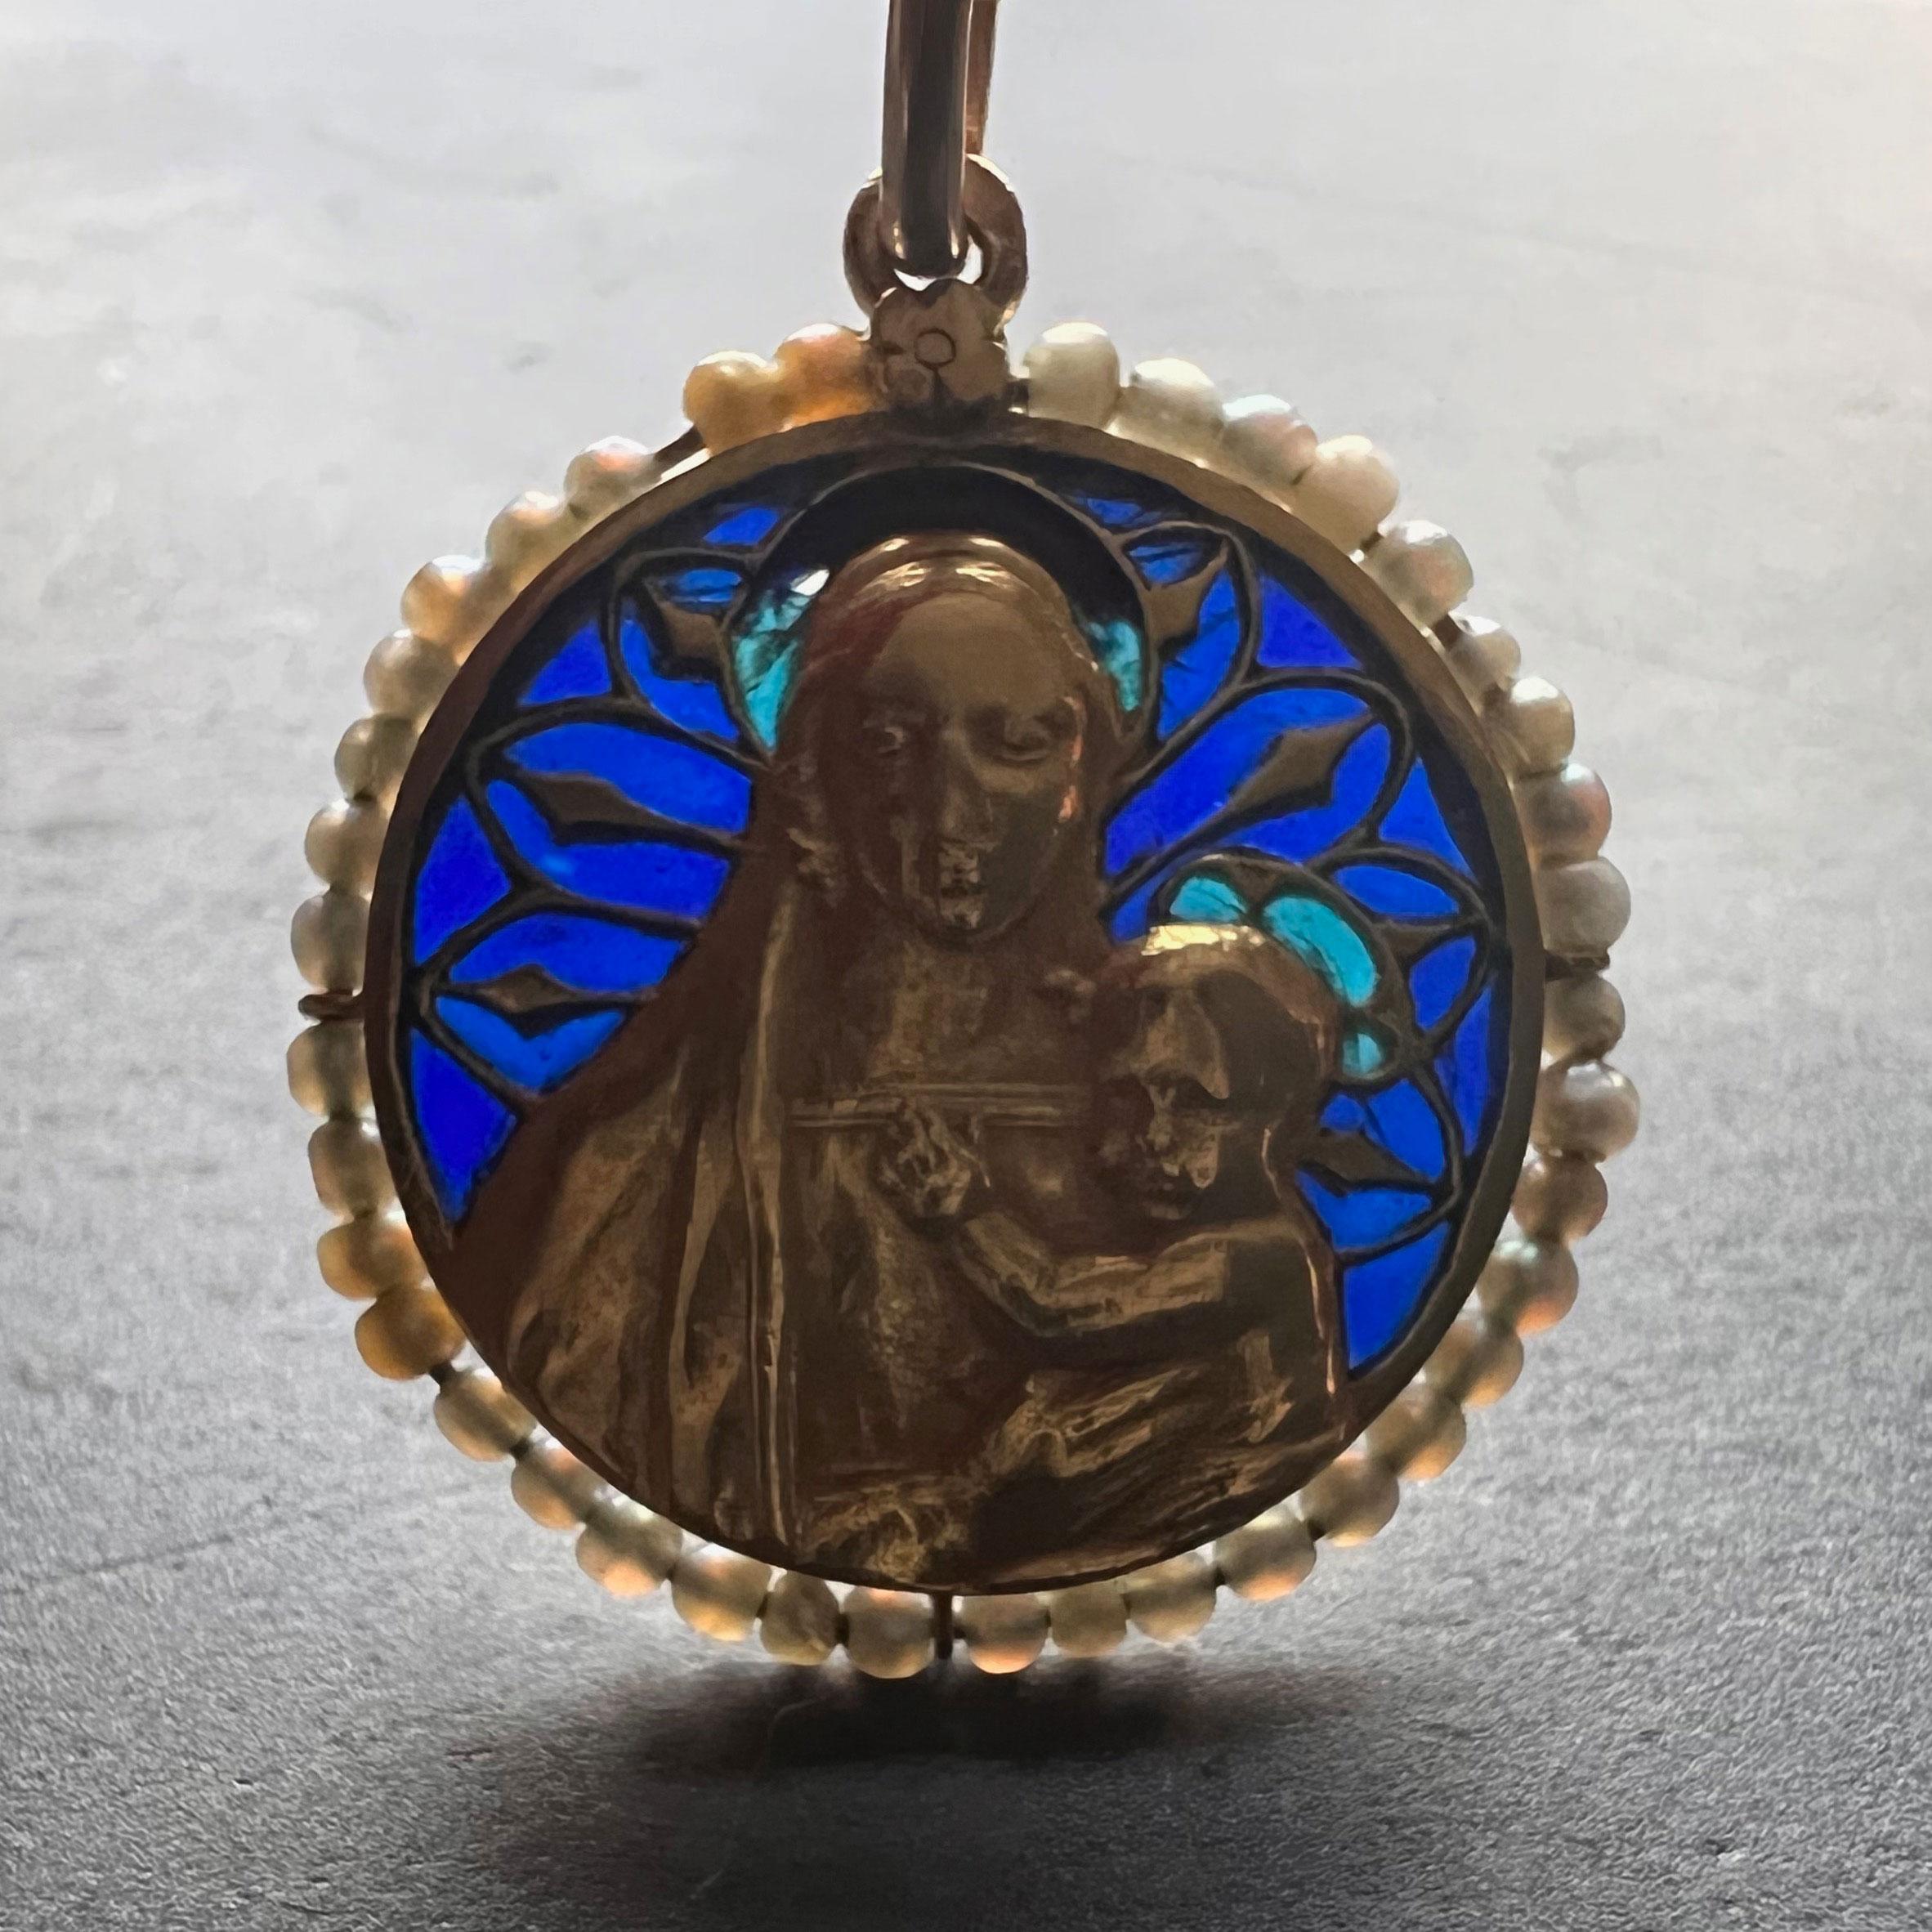 An 18 karat (18K) yellow gold pendant designed as a round medal depicting the Madonna and Child with blue plique-a-jour enamel and seed pearl surround. Stamped with the owl mark for French import and 18 karat gold, with 39 natural seed pearls.